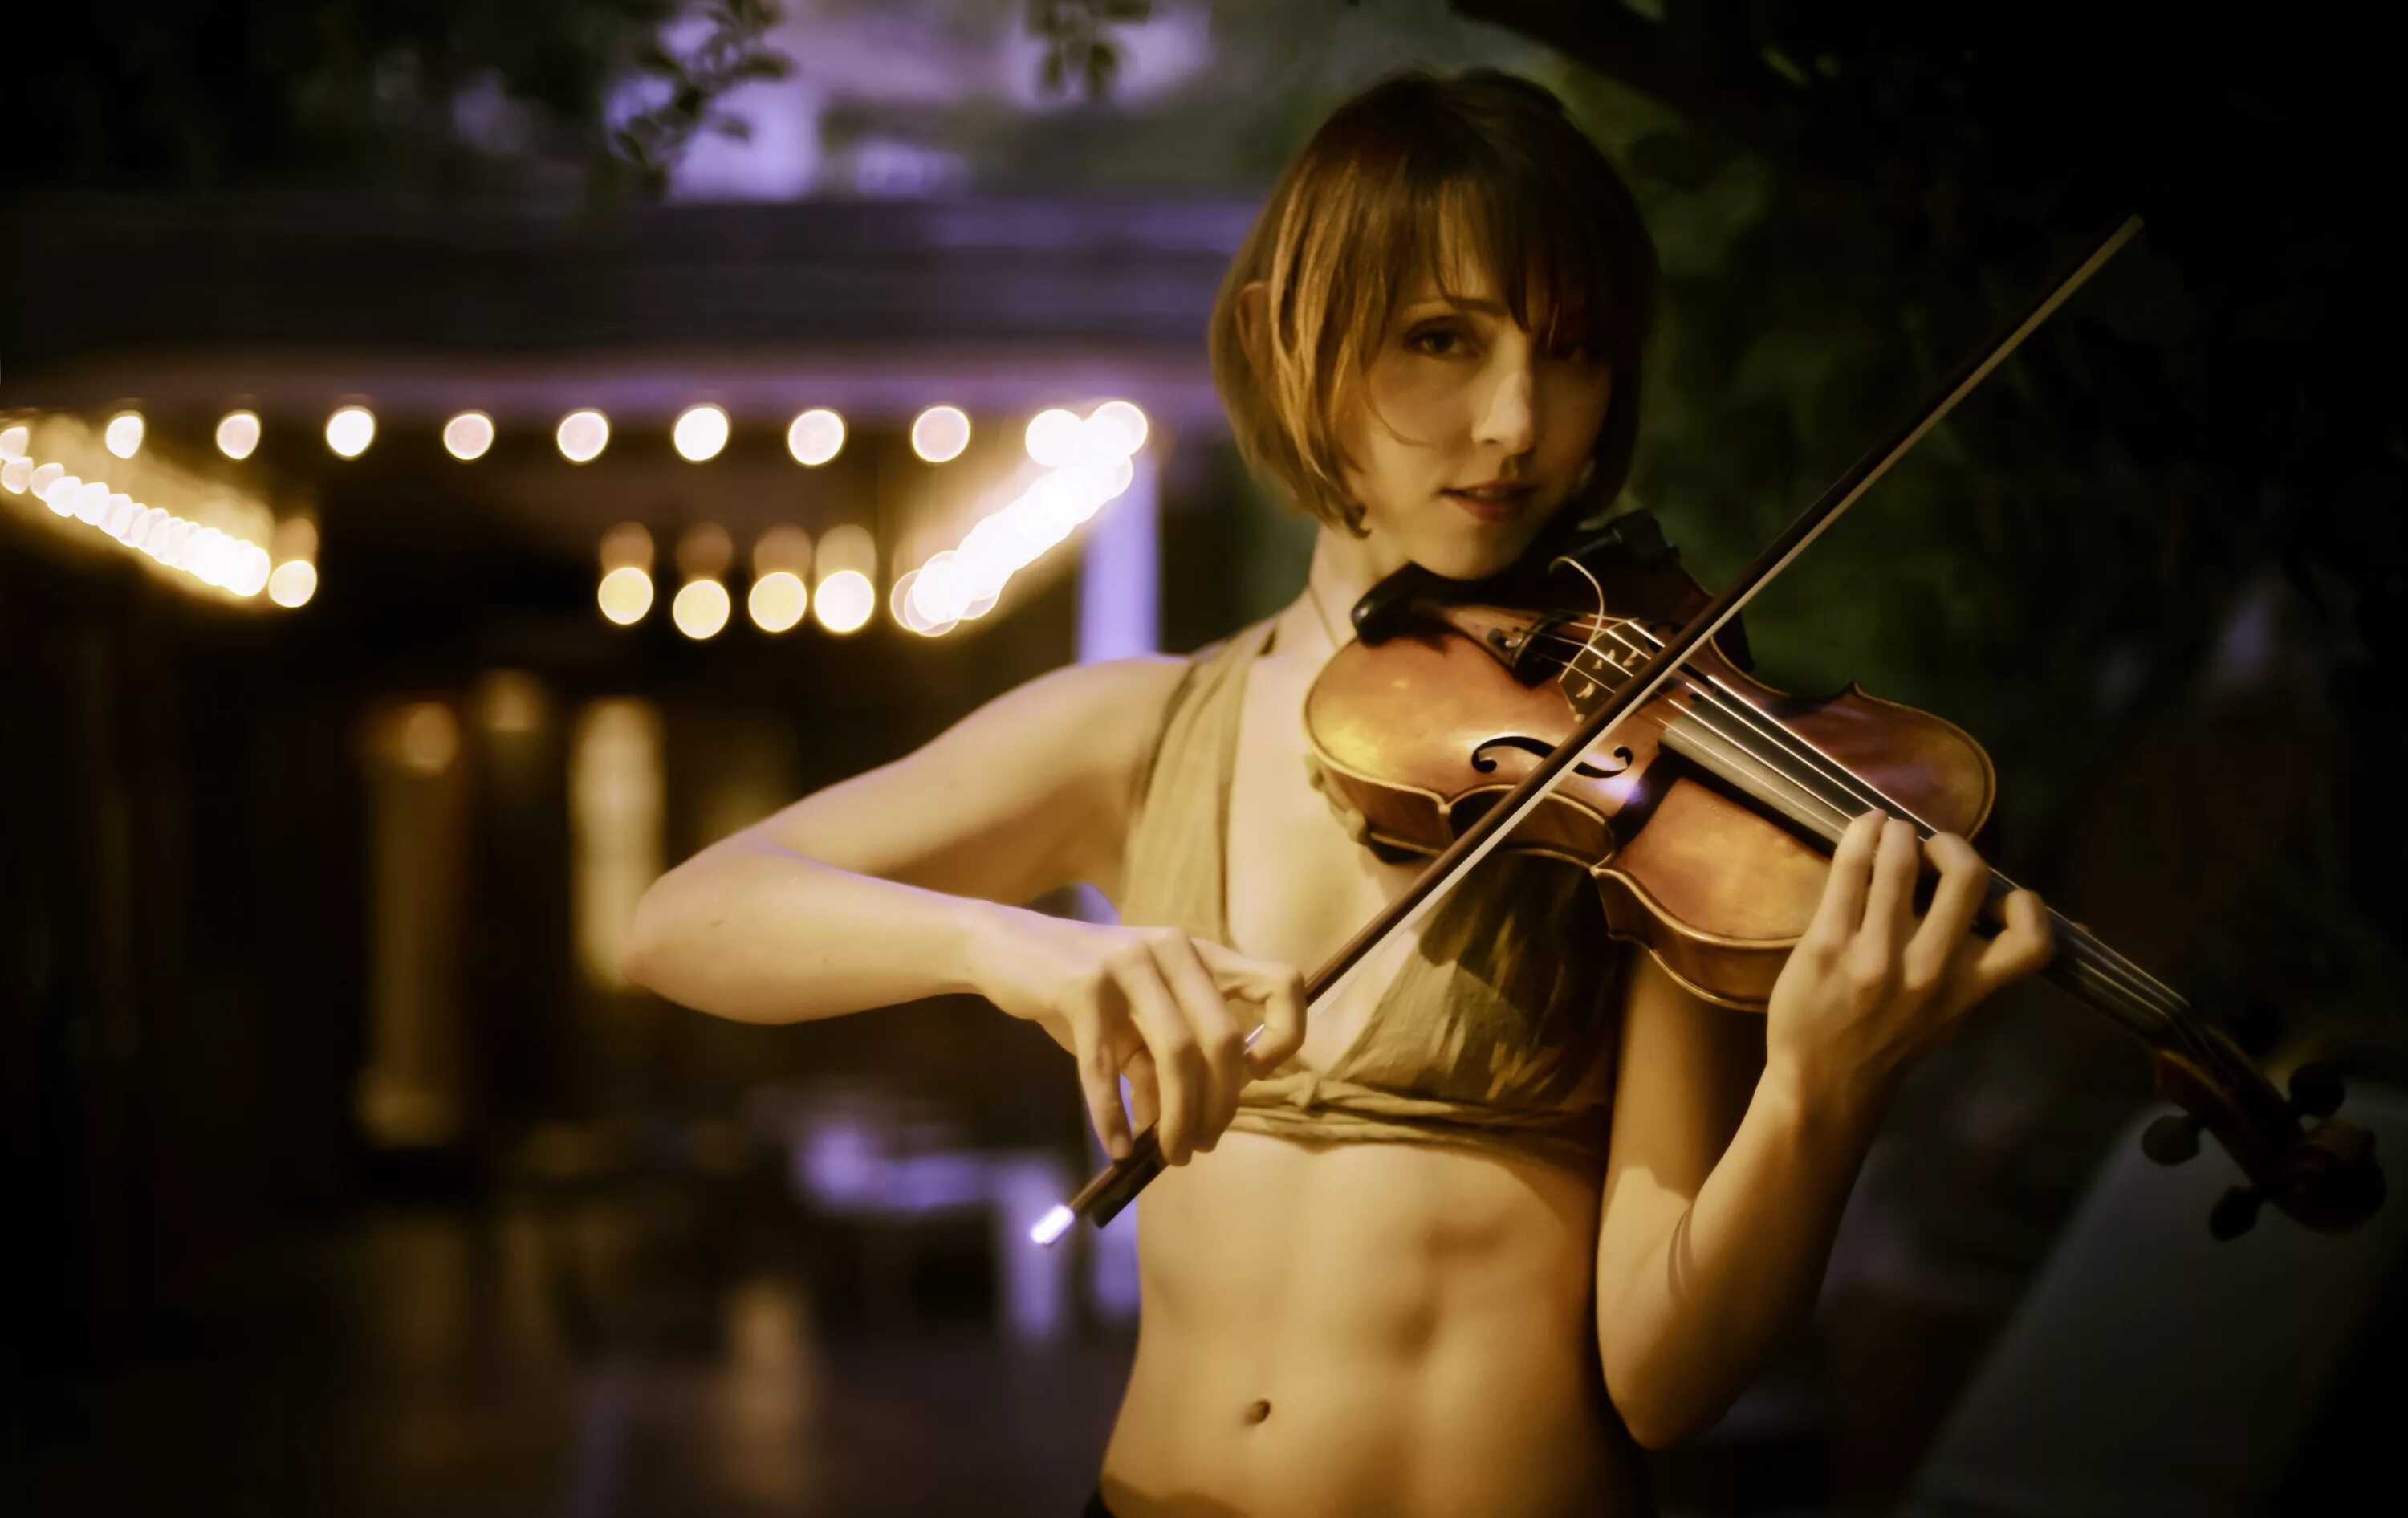 He plays the violin better. Jenny o'Connor скрипачка. Jenny o'Connor Violinist.